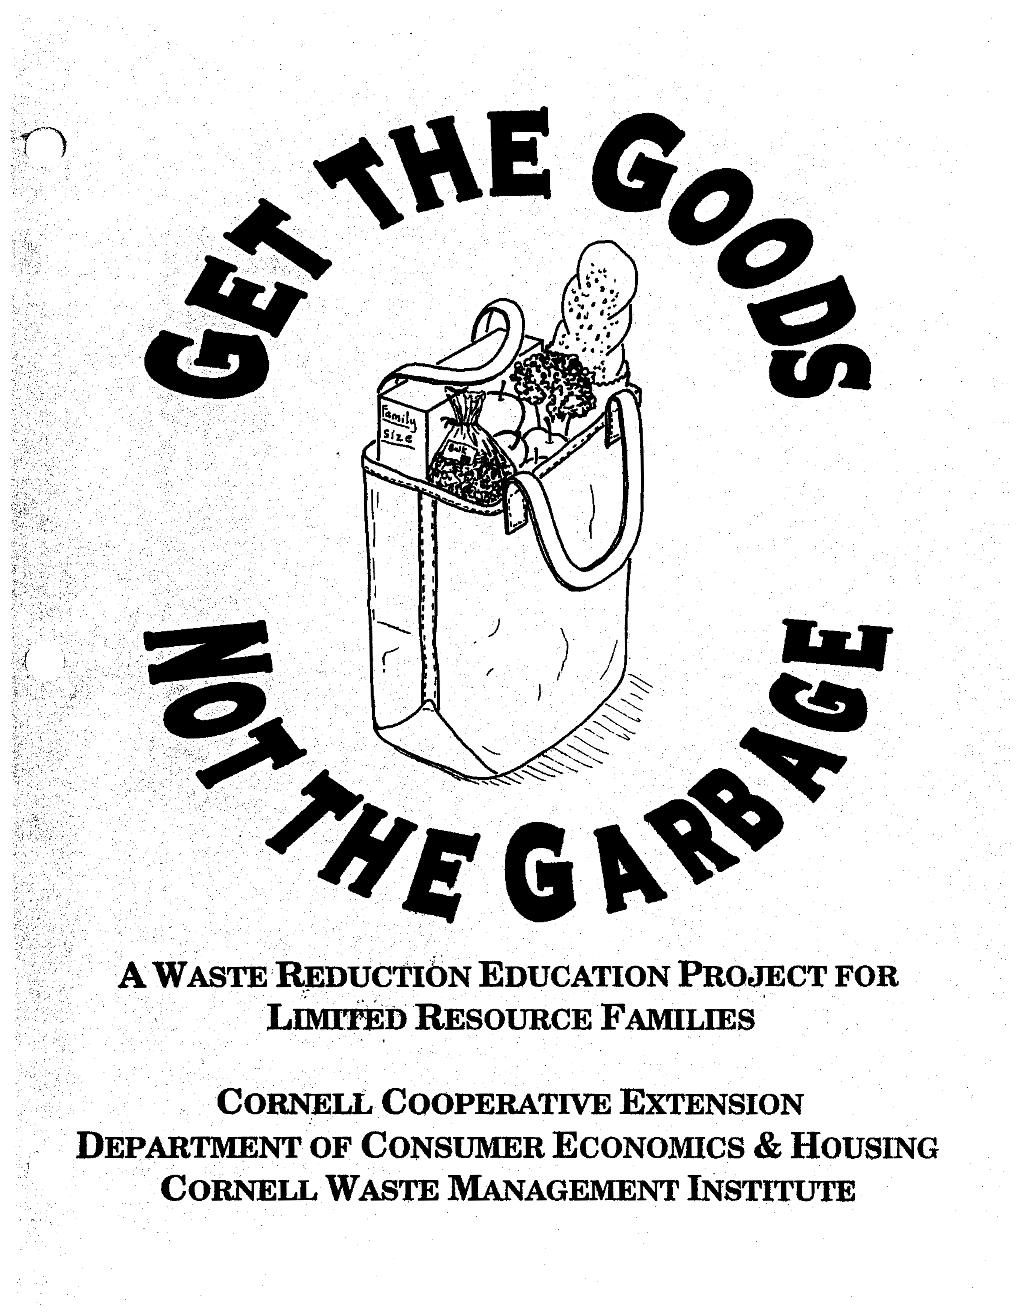 Get the Goods Not the Garbage